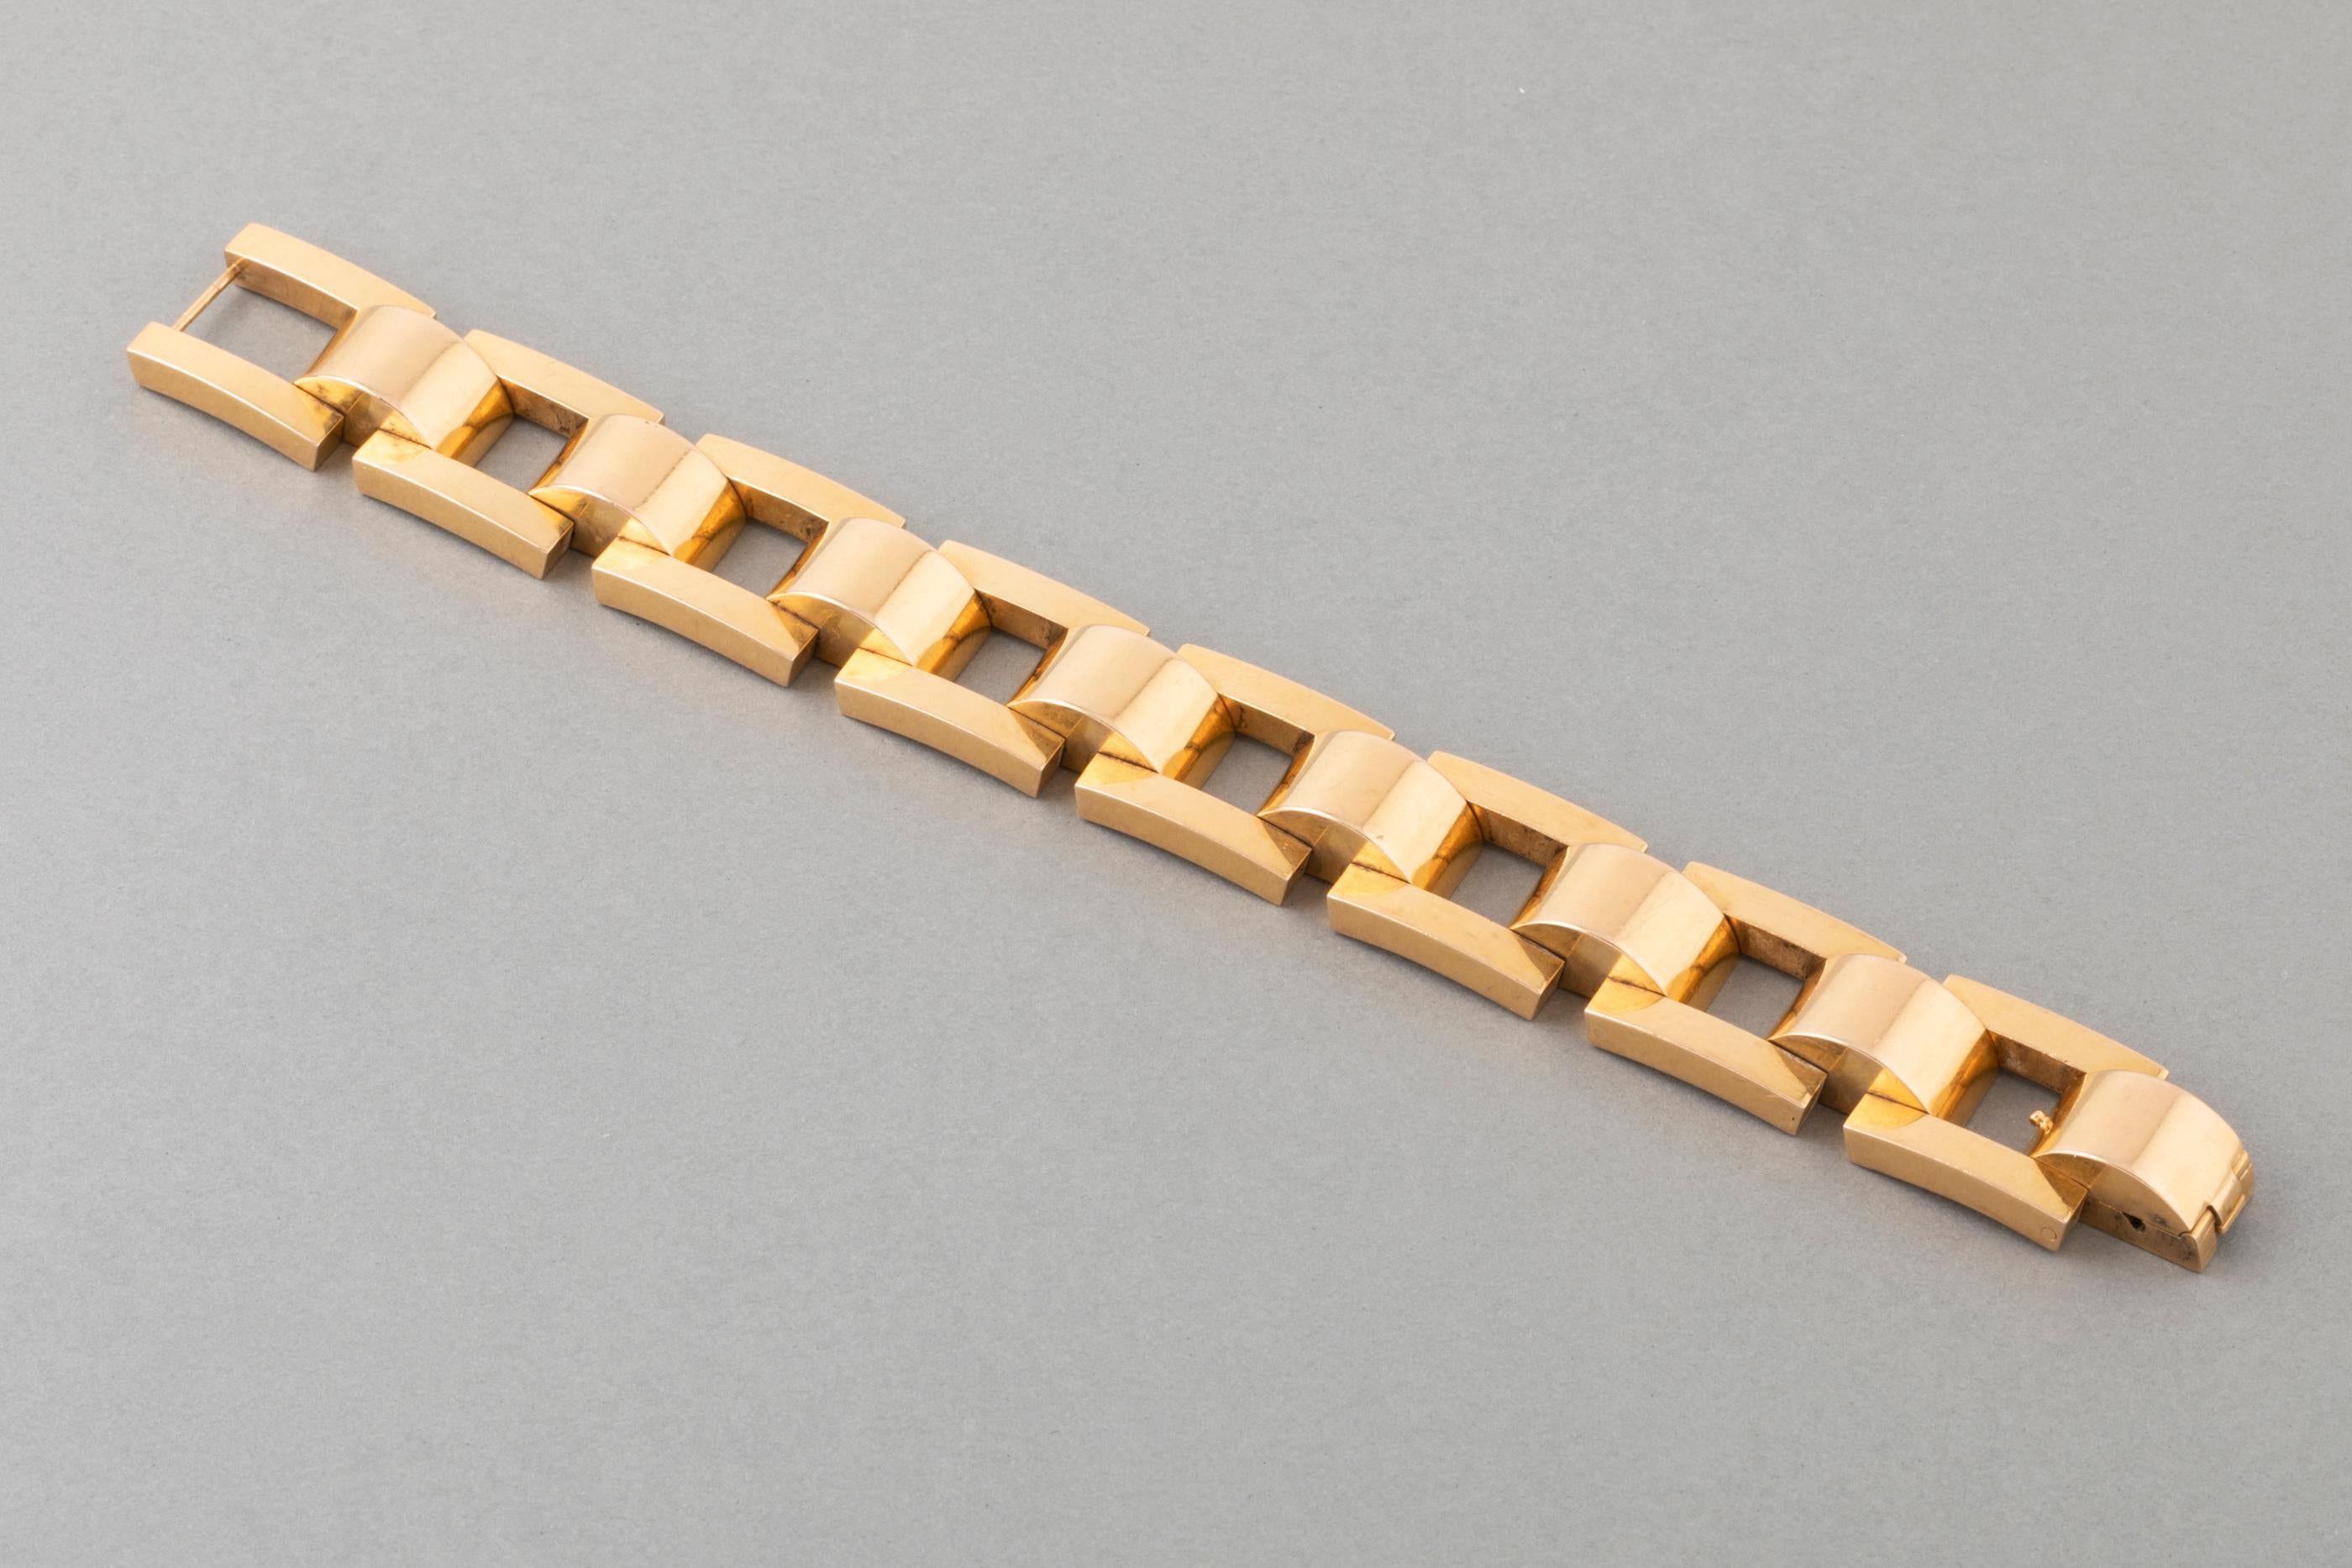 Elegant French Gold Tank Bracelet

Very beautiful bracelet, made in France circa 1945.

The bracelet has presence: it weights 66.5 grams. 

The width is 1.8 cm, the lengh is 18cm (7.2 inches)

The gold is 18k.